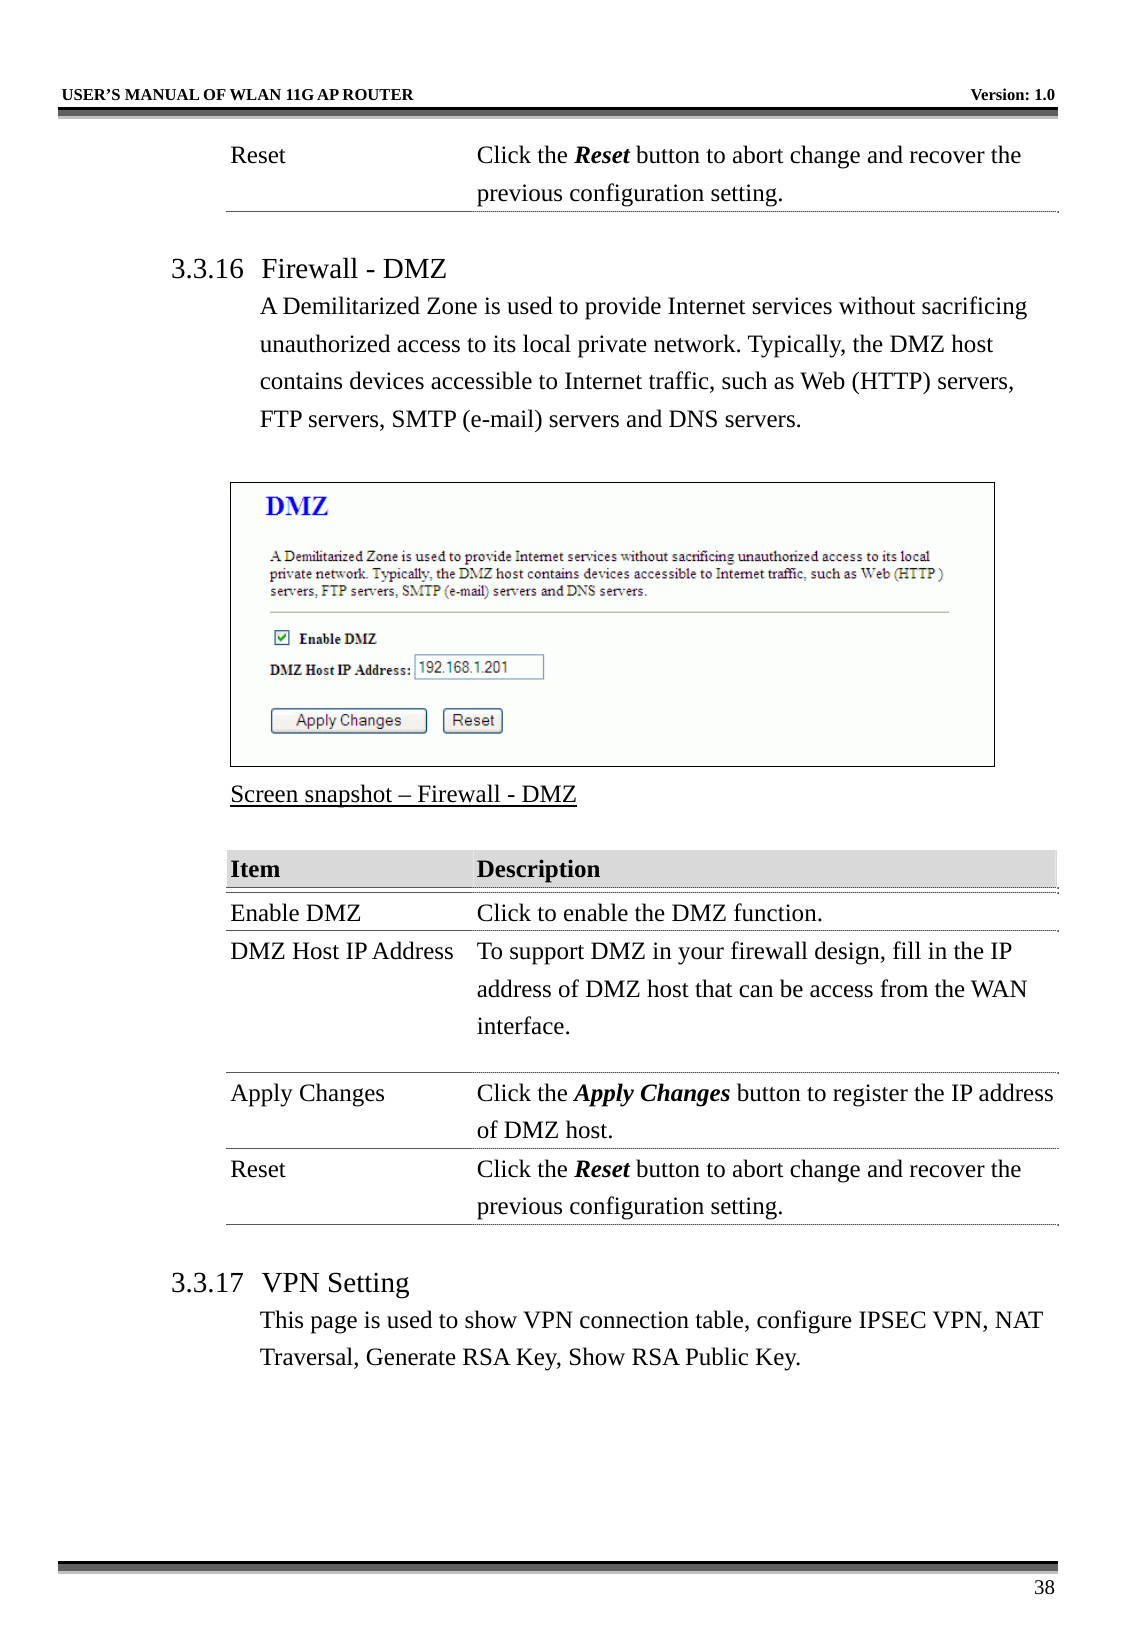   USER’S MANUAL OF WLAN 11G AP ROUTER    Version: 1.0     38 Reset Click the Reset button to abort change and recover the previous configuration setting.  3.3.16  Firewall - DMZ A Demilitarized Zone is used to provide Internet services without sacrificing unauthorized access to its local private network. Typically, the DMZ host contains devices accessible to Internet traffic, such as Web (HTTP) servers, FTP servers, SMTP (e-mail) servers and DNS servers.   Screen snapshot – Firewall - DMZ  Item  Description   Enable DMZ  Click to enable the DMZ function. DMZ Host IP Address  To support DMZ in your firewall design, fill in the IP address of DMZ host that can be access from the WAN interface. Apply Changes  Click the Apply Changes button to register the IP address of DMZ host. Reset Click the Reset button to abort change and recover the previous configuration setting.  3.3.17 VPN Setting This page is used to show VPN connection table, configure IPSEC VPN, NAT Traversal, Generate RSA Key, Show RSA Public Key.  